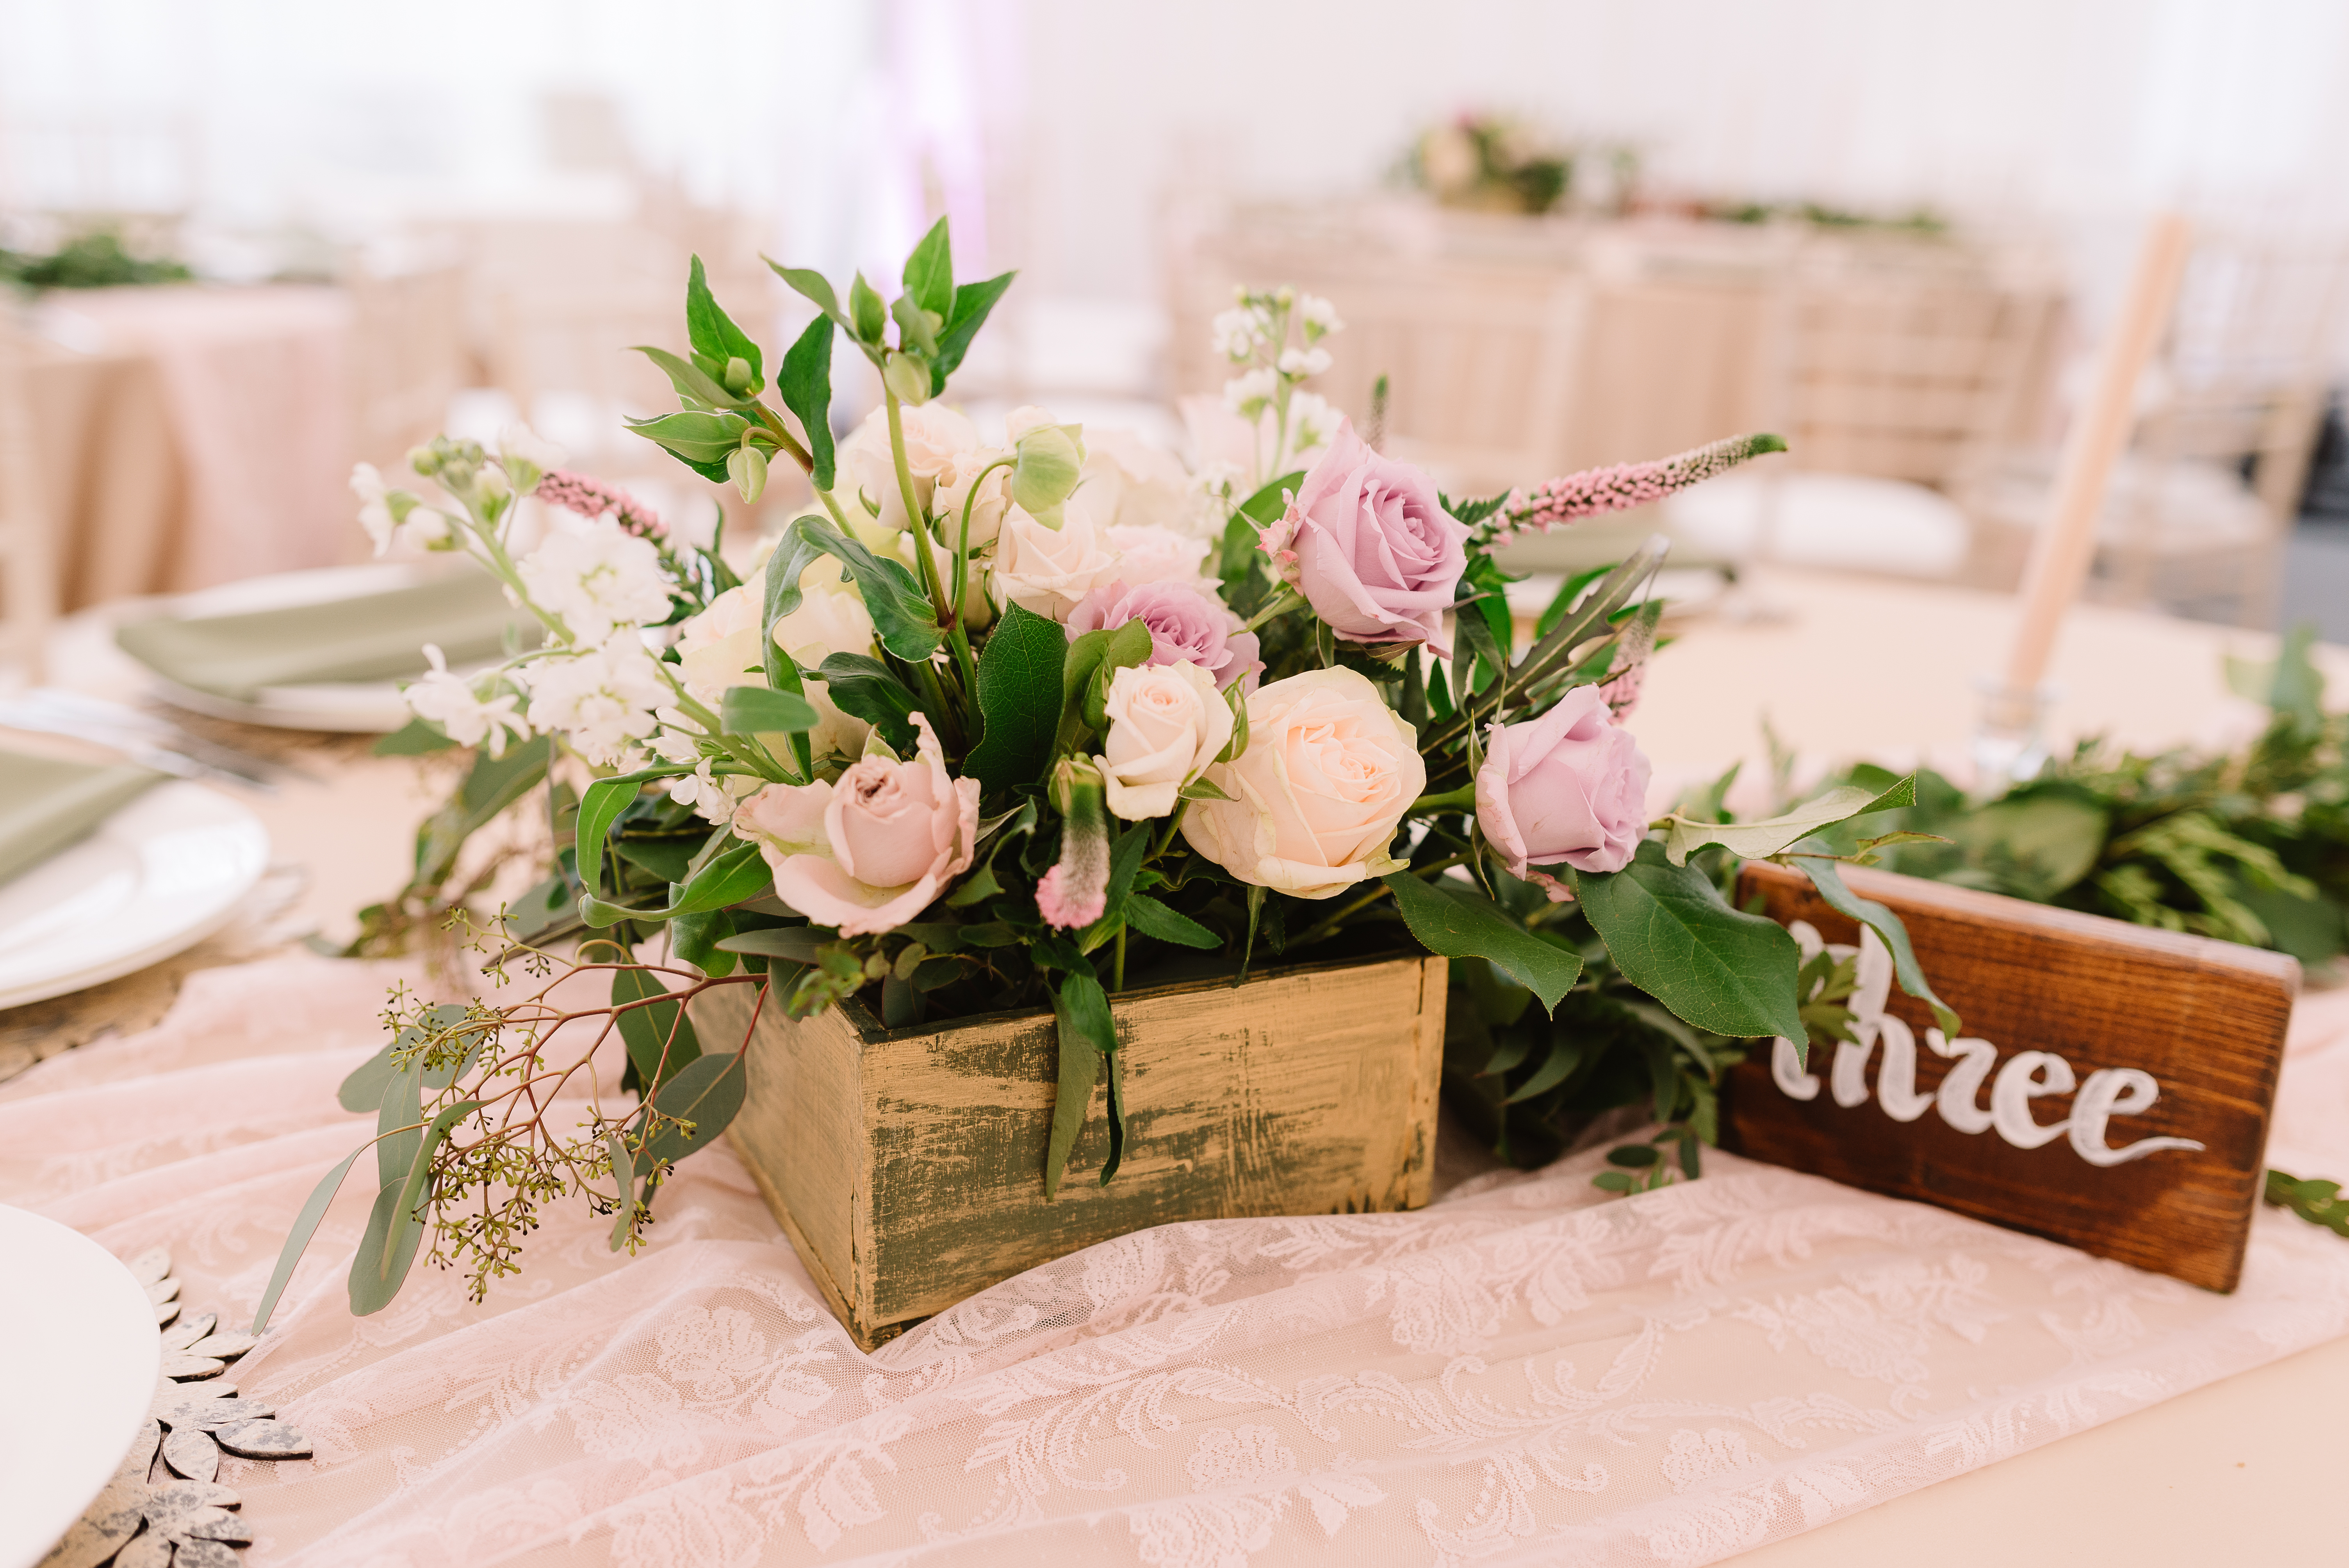 Save Money on Wedding Centerpieces with These Creative DIY Ideas